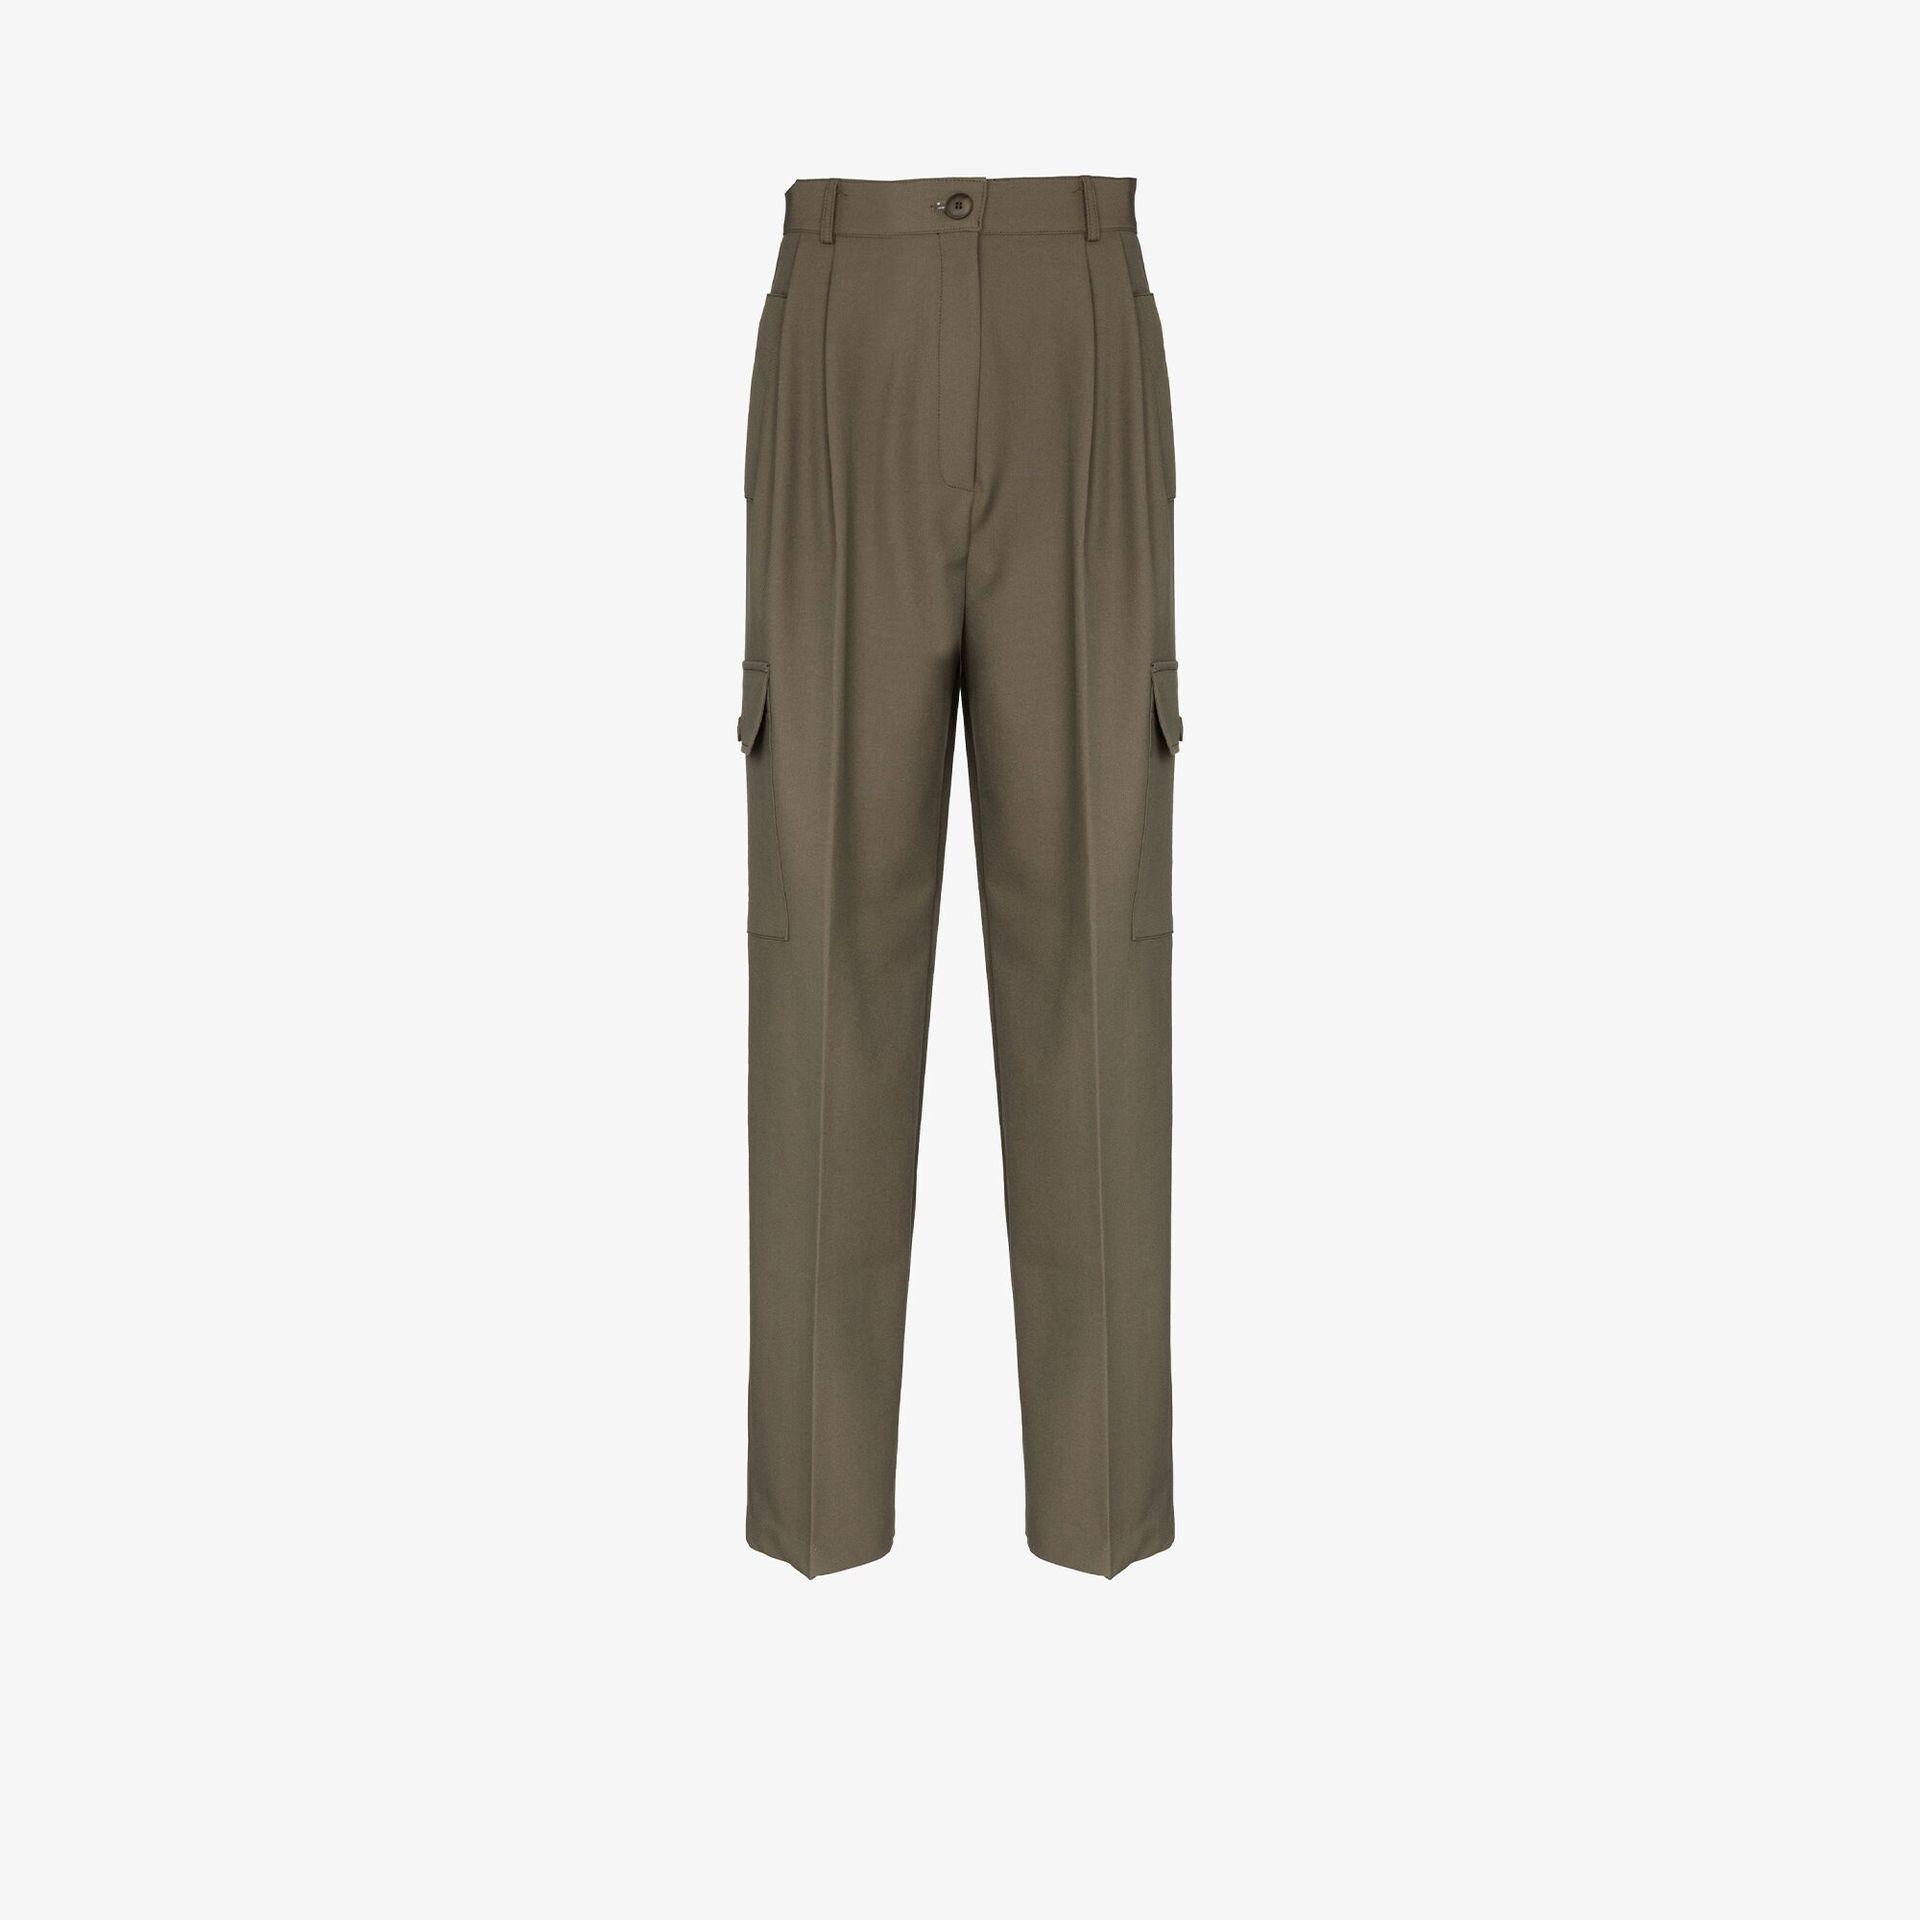 Frankie Shop Neutral Maesa Tailored Cargo Trousers in Natural Womens Clothing Trousers Slacks and Chinos Cargo trousers 